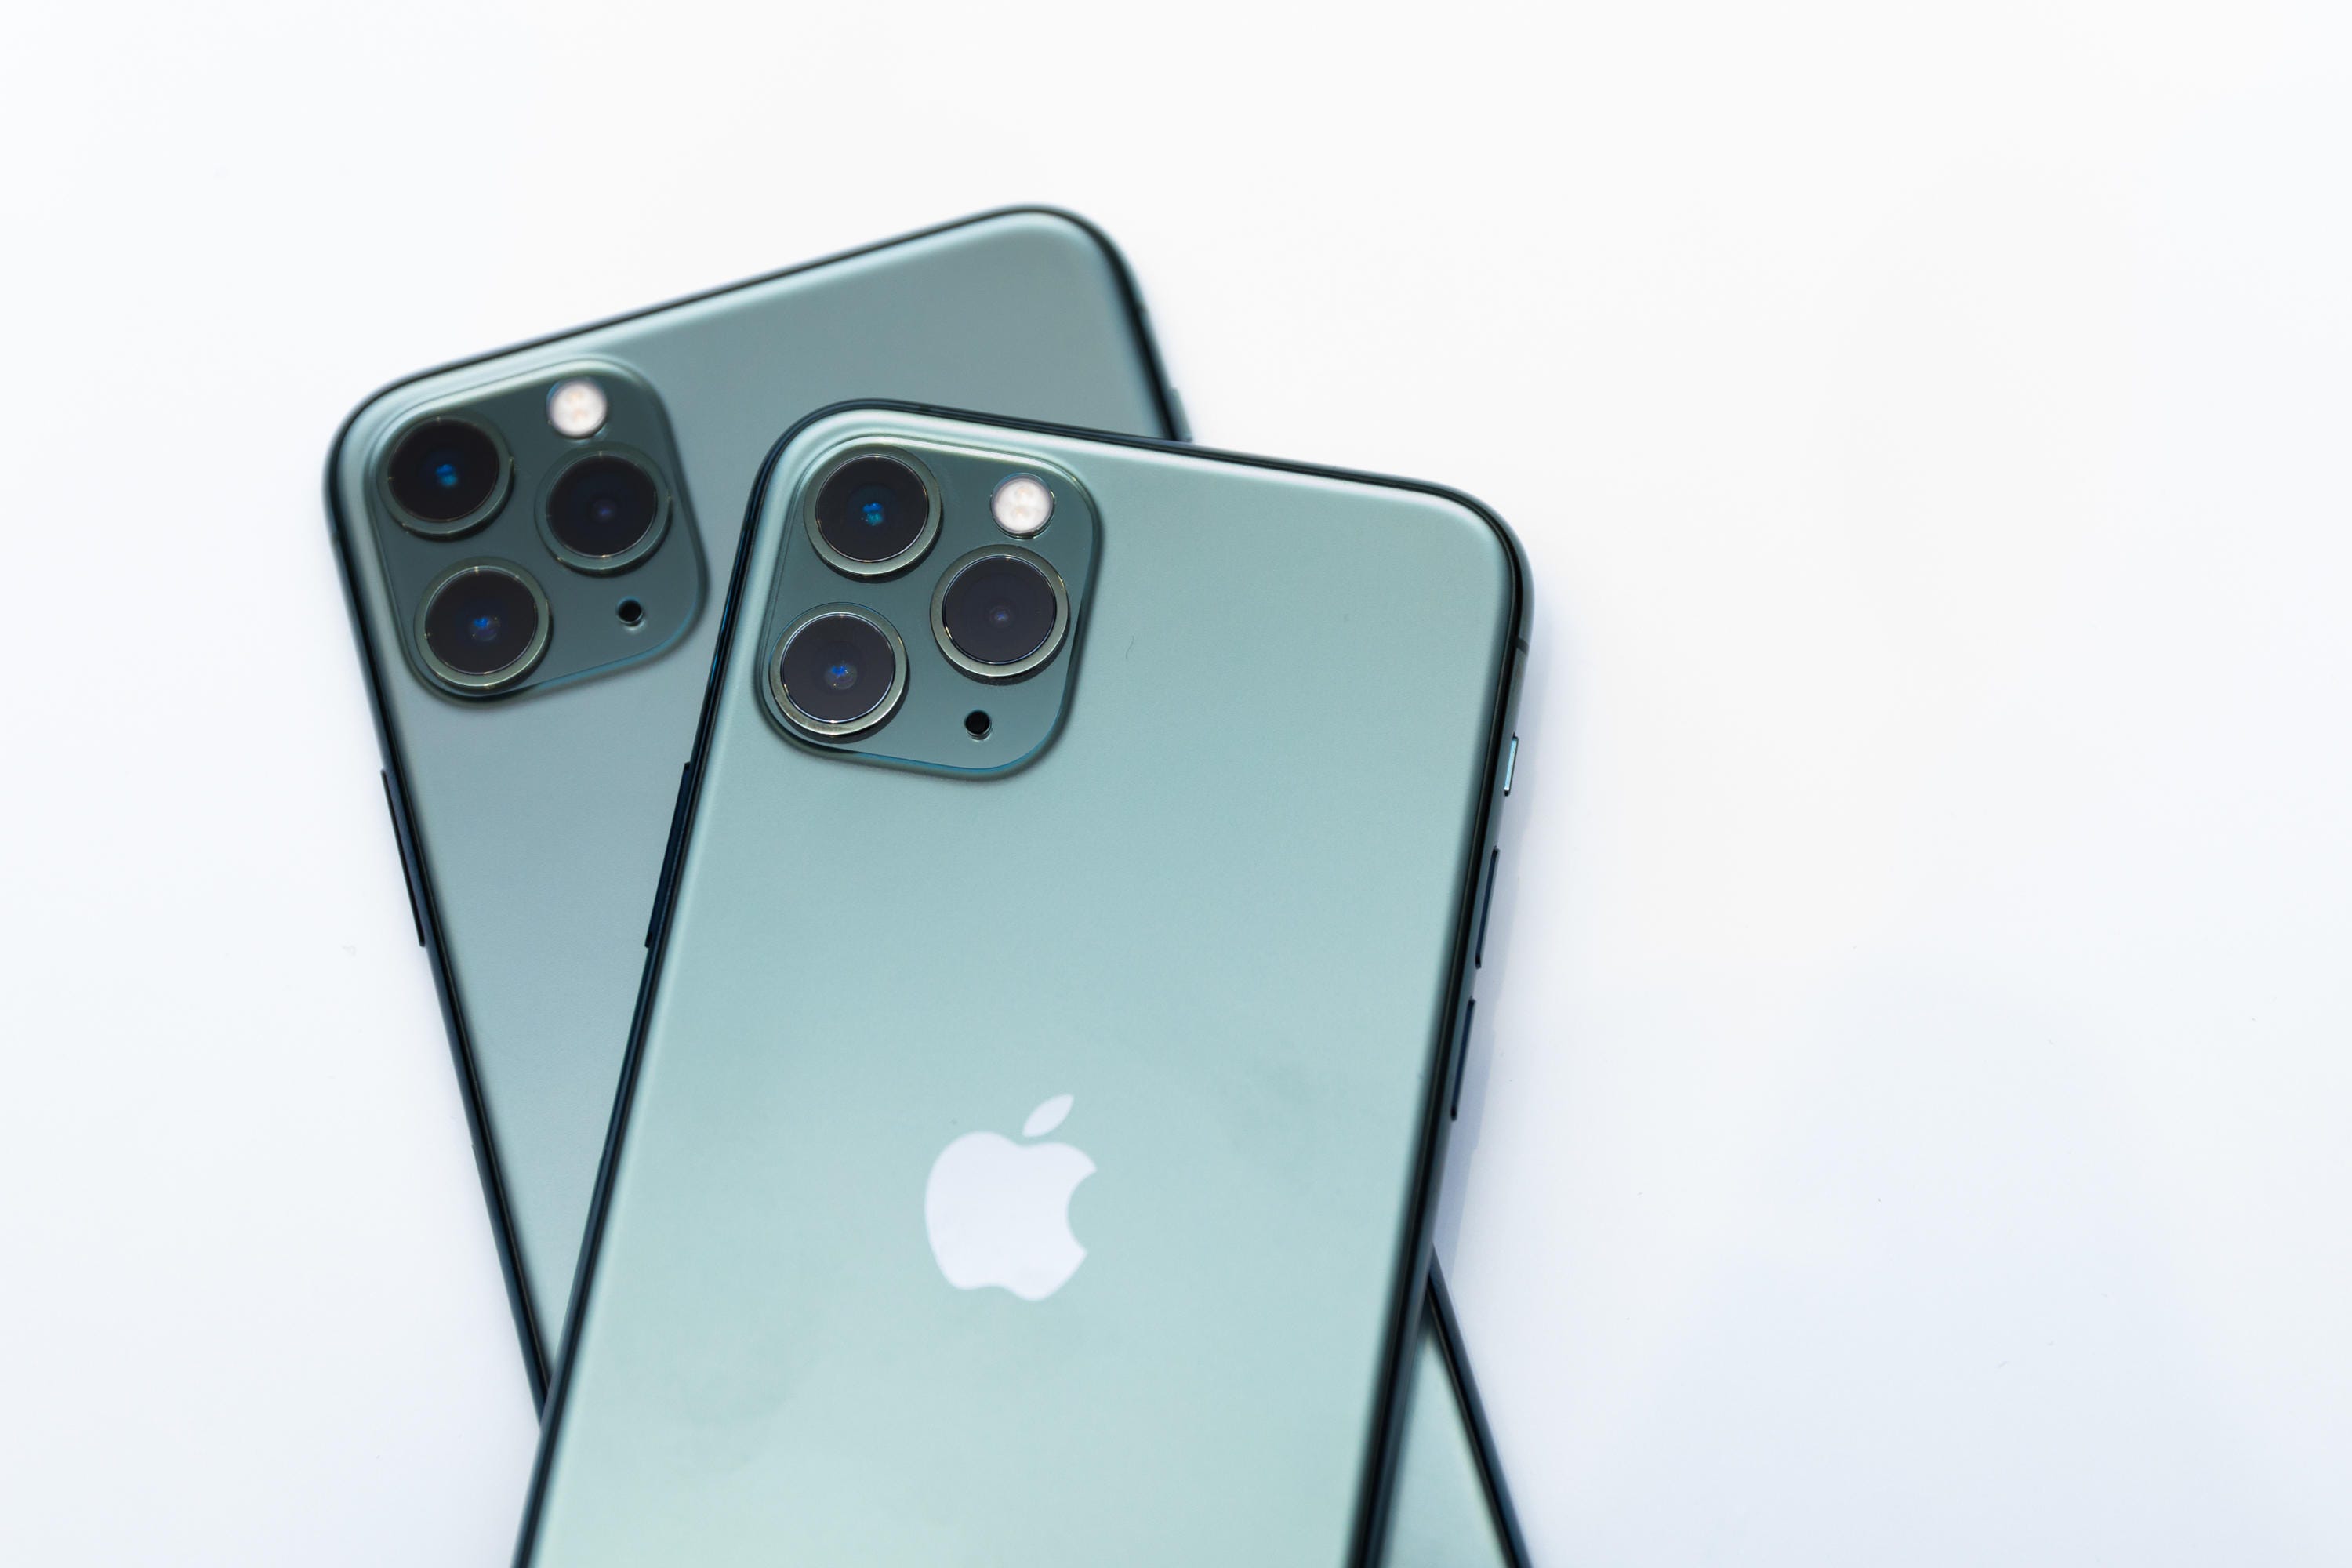 Iphone 11 Pro And 11 Pro Max Specs Vs Galaxy S10 Note 10 And Pixel 3 Xl Android Phones Cnet